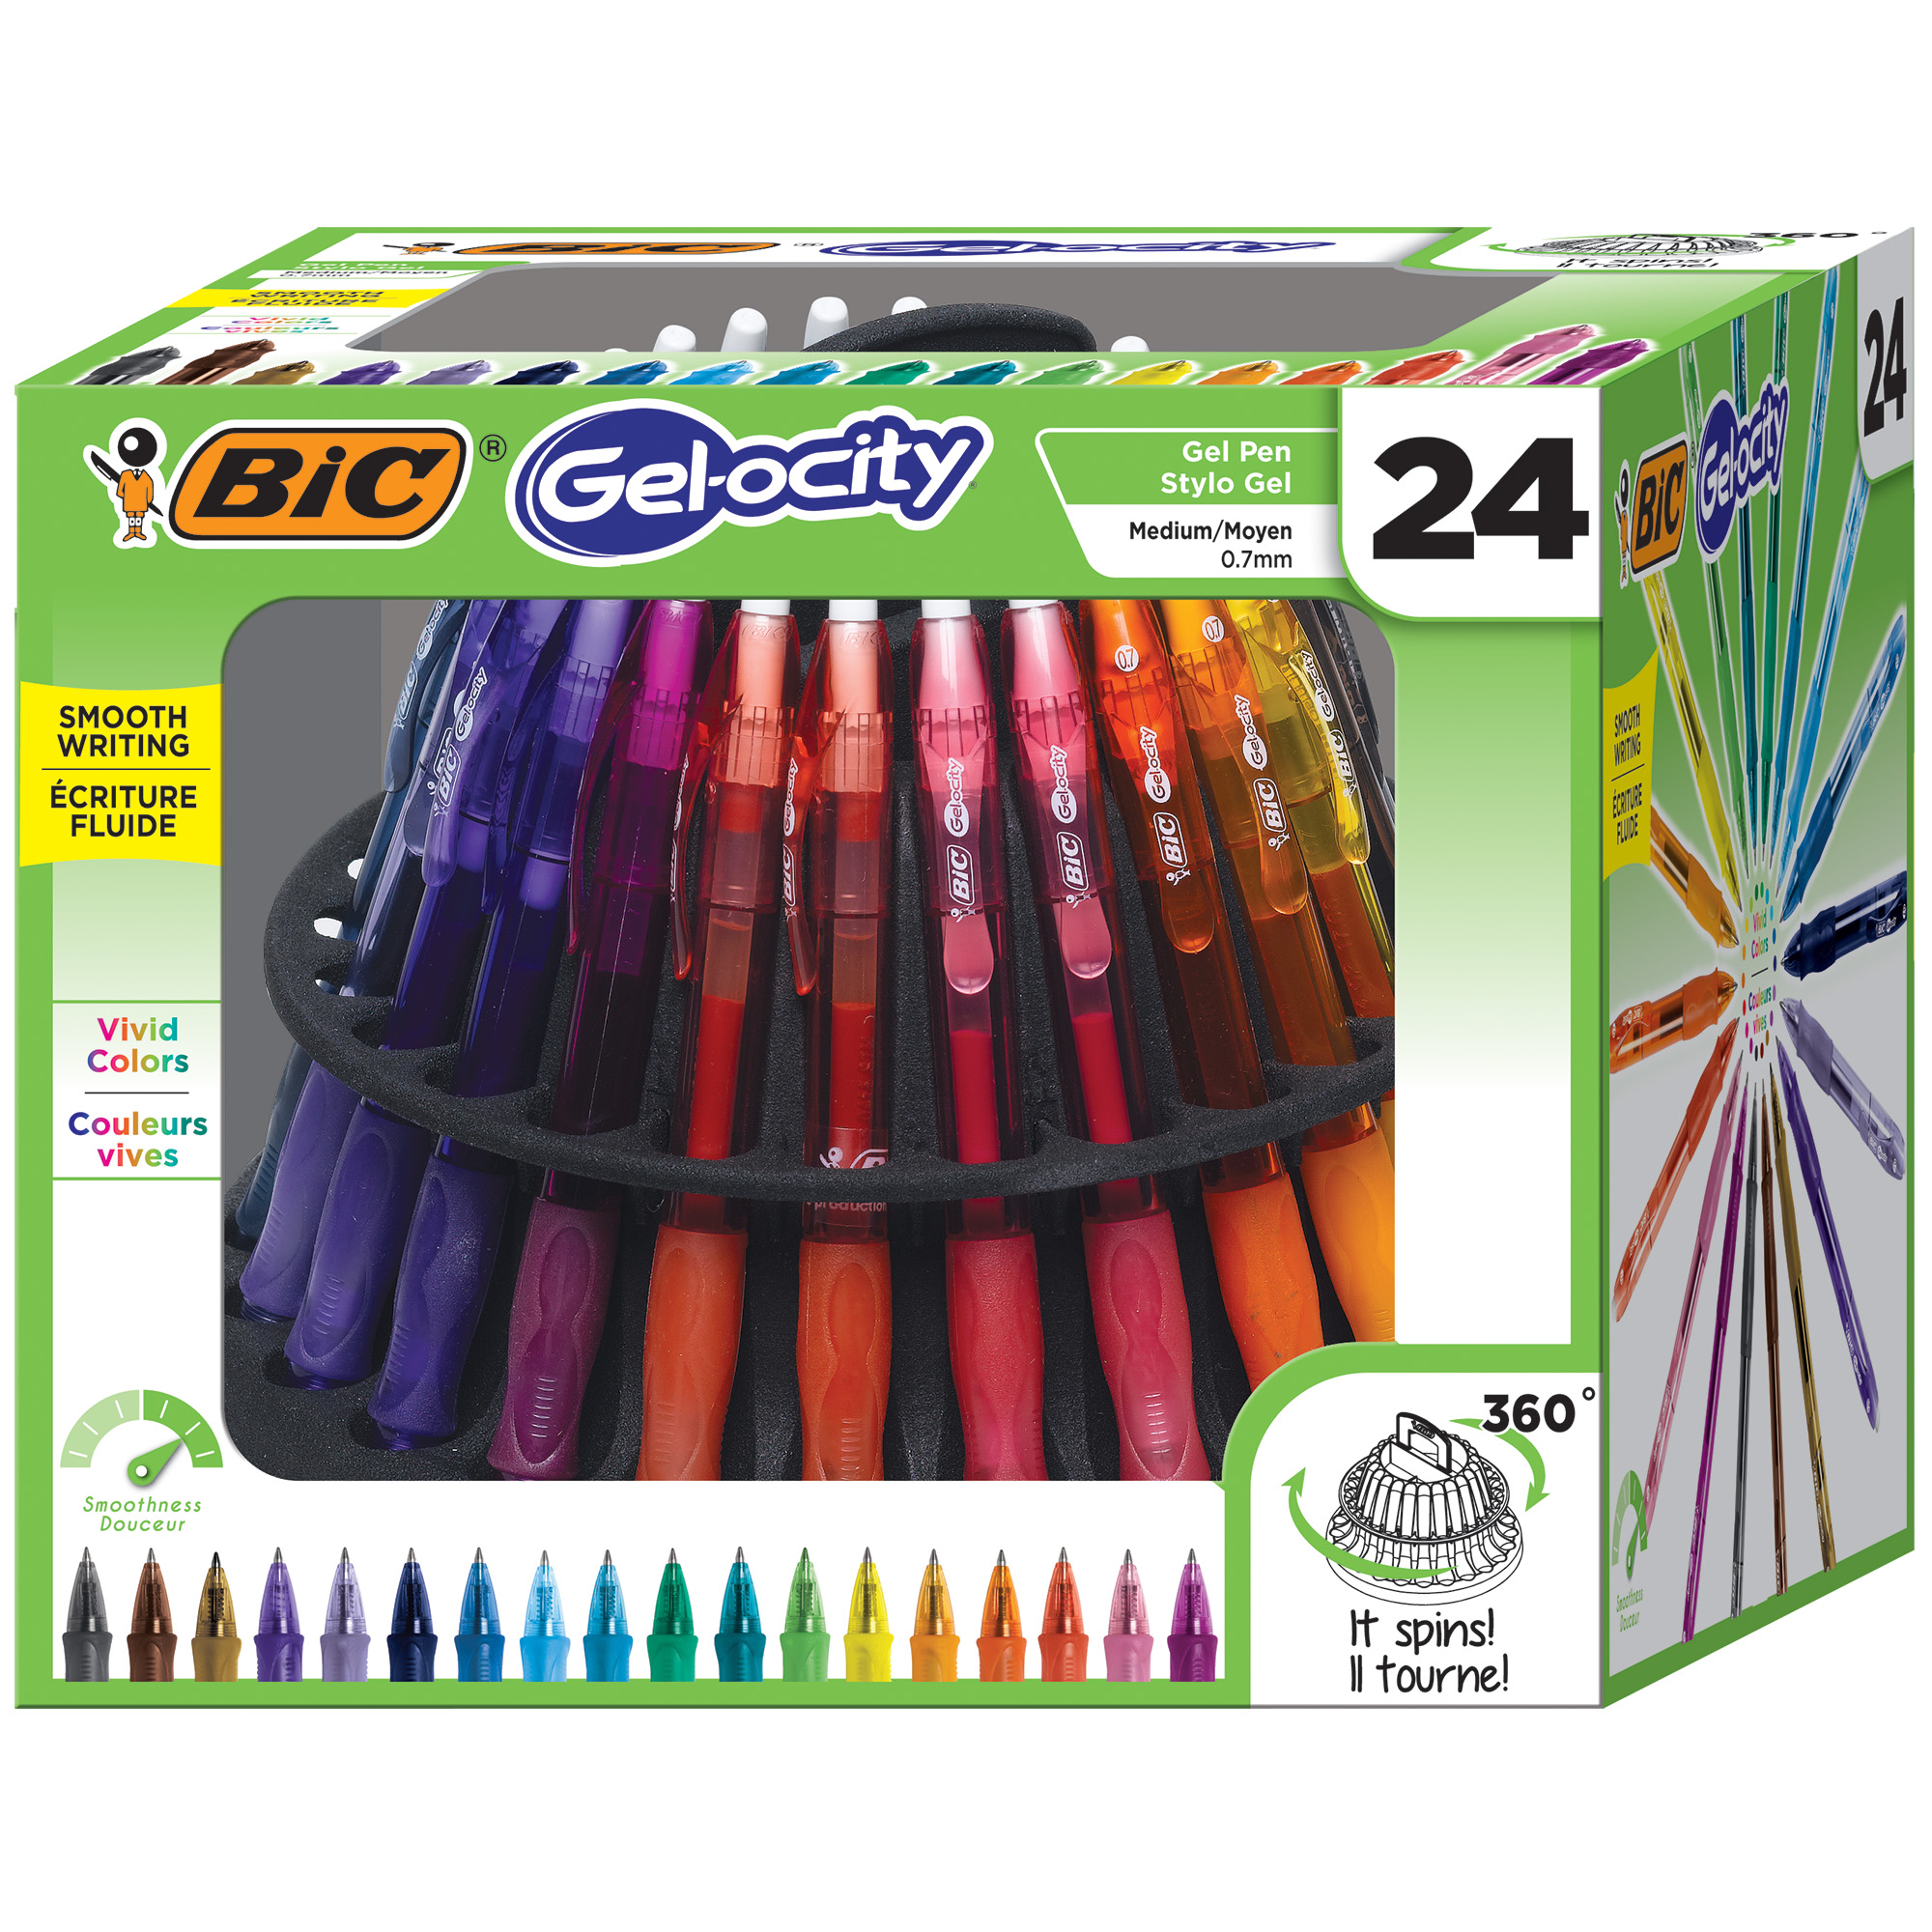 BIC Gel-ocity Original Retractable Gel Pen Spinner, Assorted Colors, 24-Count, Convenient Storage Spinner Rotates 360 Degrees - image 1 of 9